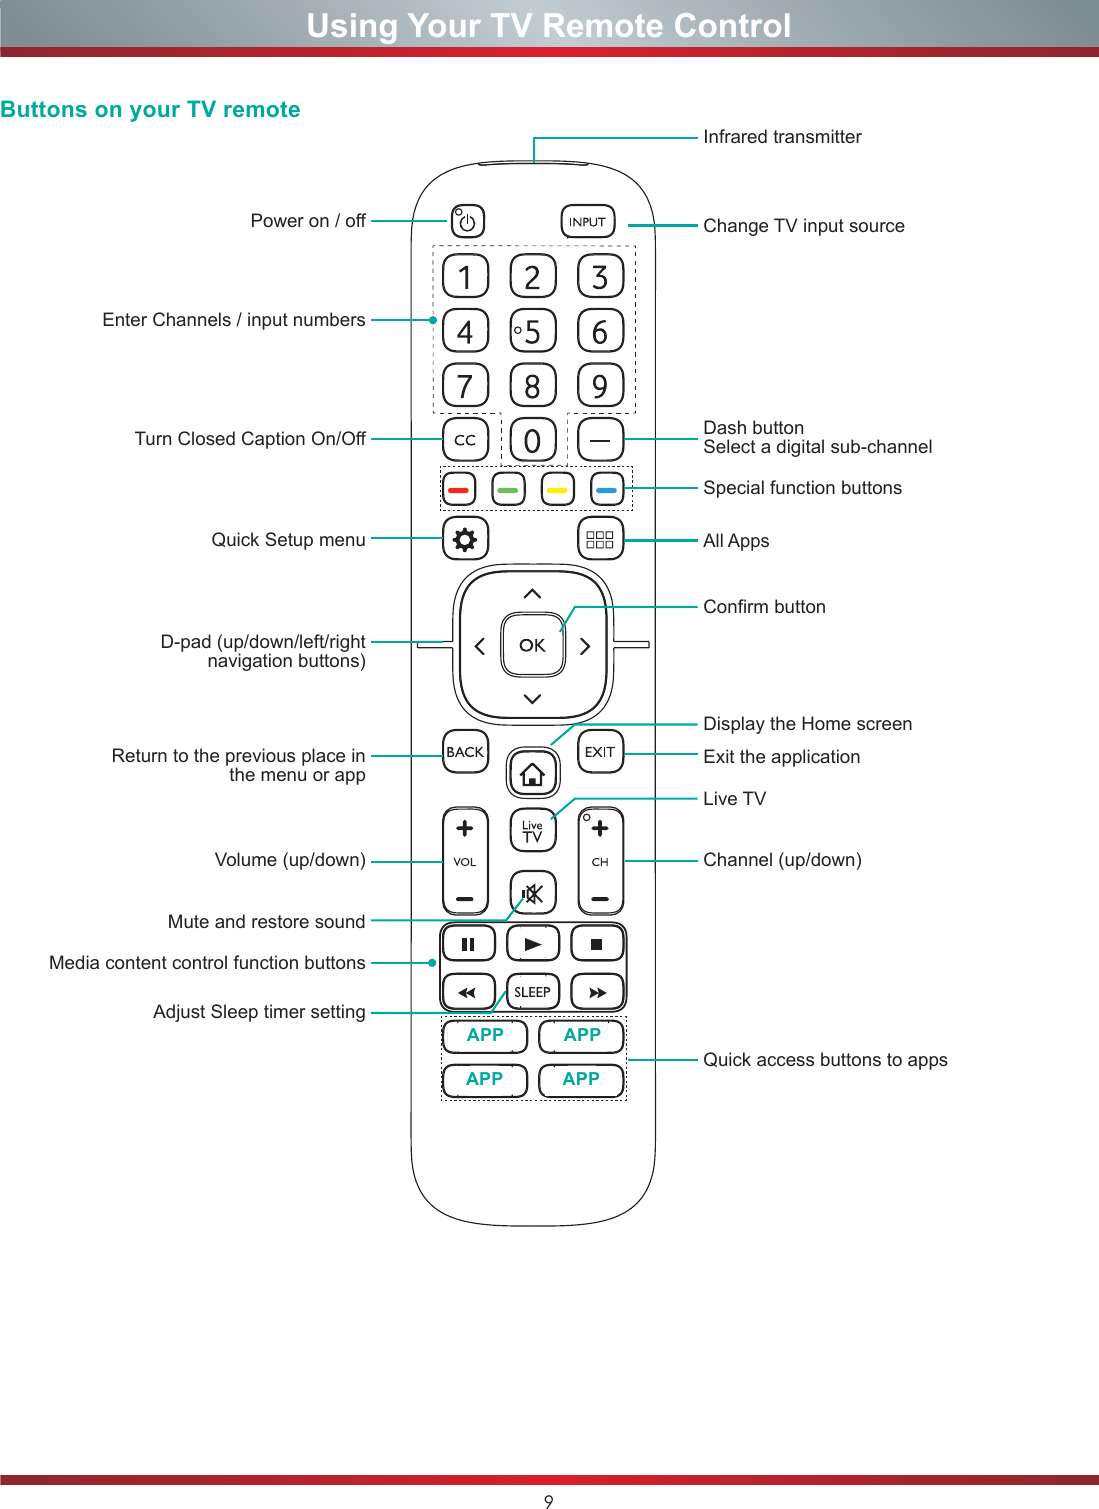 9Using Your TV Remote ControlButtons on your TV remotePower on / offEnter Channels / input numbersMedia content control function buttonsDash button Select a digital sub-channelD-pad (up/down/left/right navigation buttons)Volume (up/down)Mute and restore soundAdjust Sleep timer settingQuick Setup menuReturn to the previous place in the menu or appLive TVInfrared transmitterChange TV input sourceChannel (up/down)Exit the applicationTurn Closed Caption On/OffSpecial function buttonsAll AppsDisplay the Home screenConfirm buttonQuick access buttons to appsAPPAPPAPPAPP